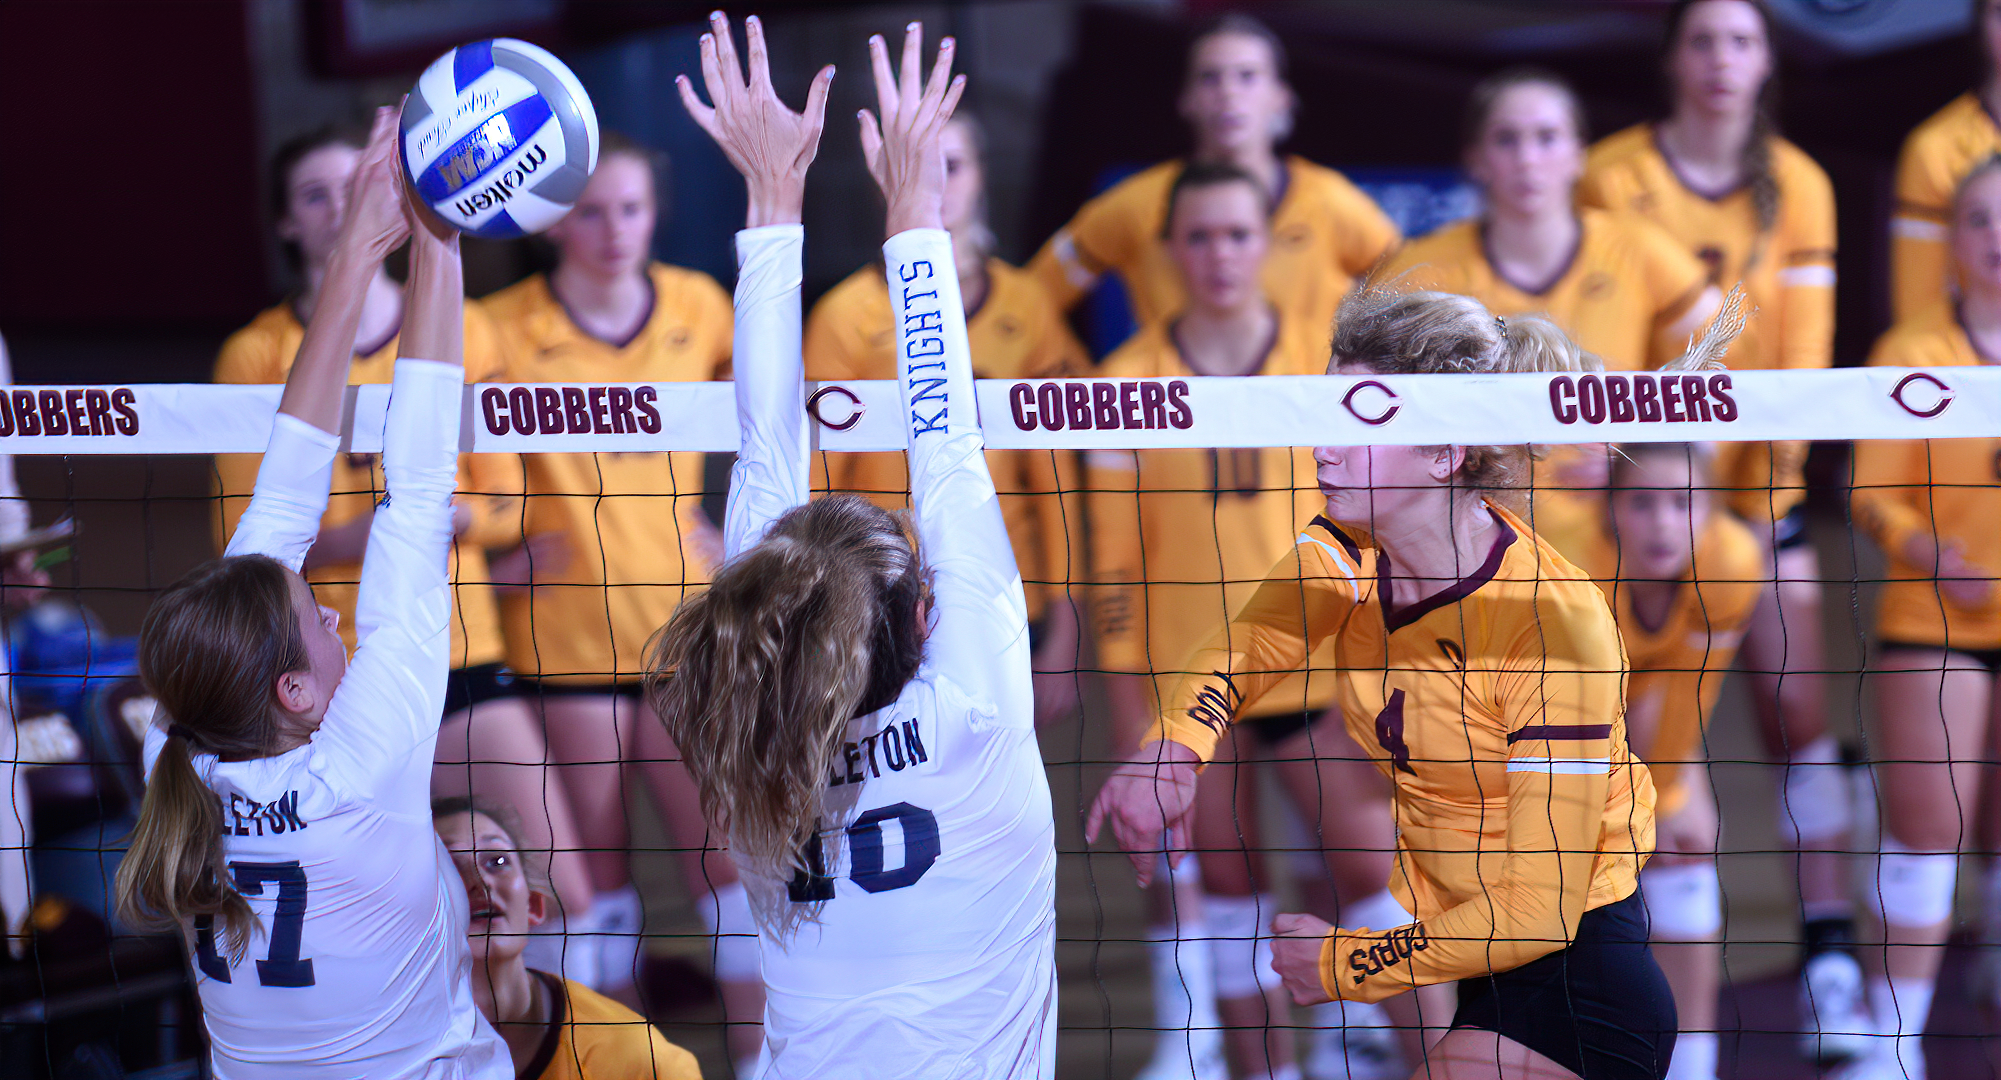 Sophomore Maria Watt had a team-high four blocks in the Cobbers' match at Carleton. She also added three kills and hit .111.